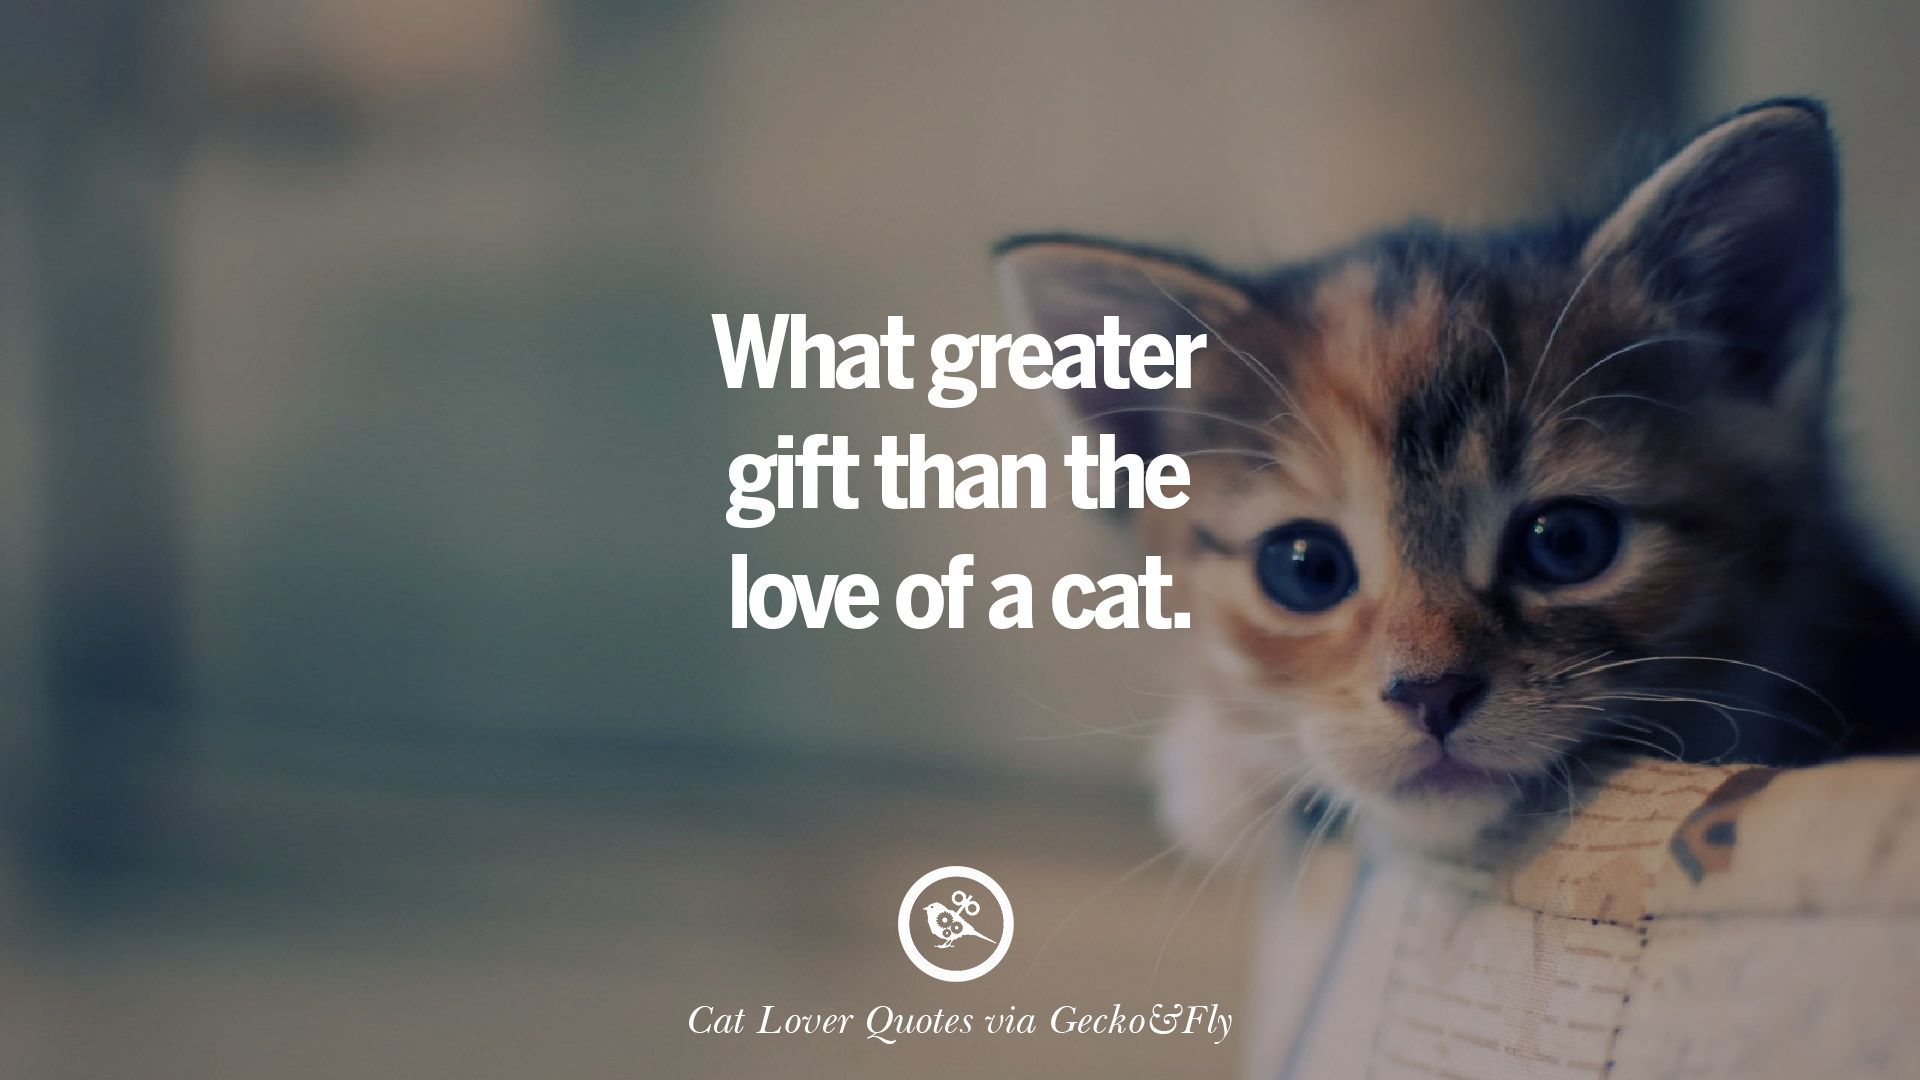 Cute Cat Image With Quotes For Crazy Cat Ladies, Gentlemen And Lovers